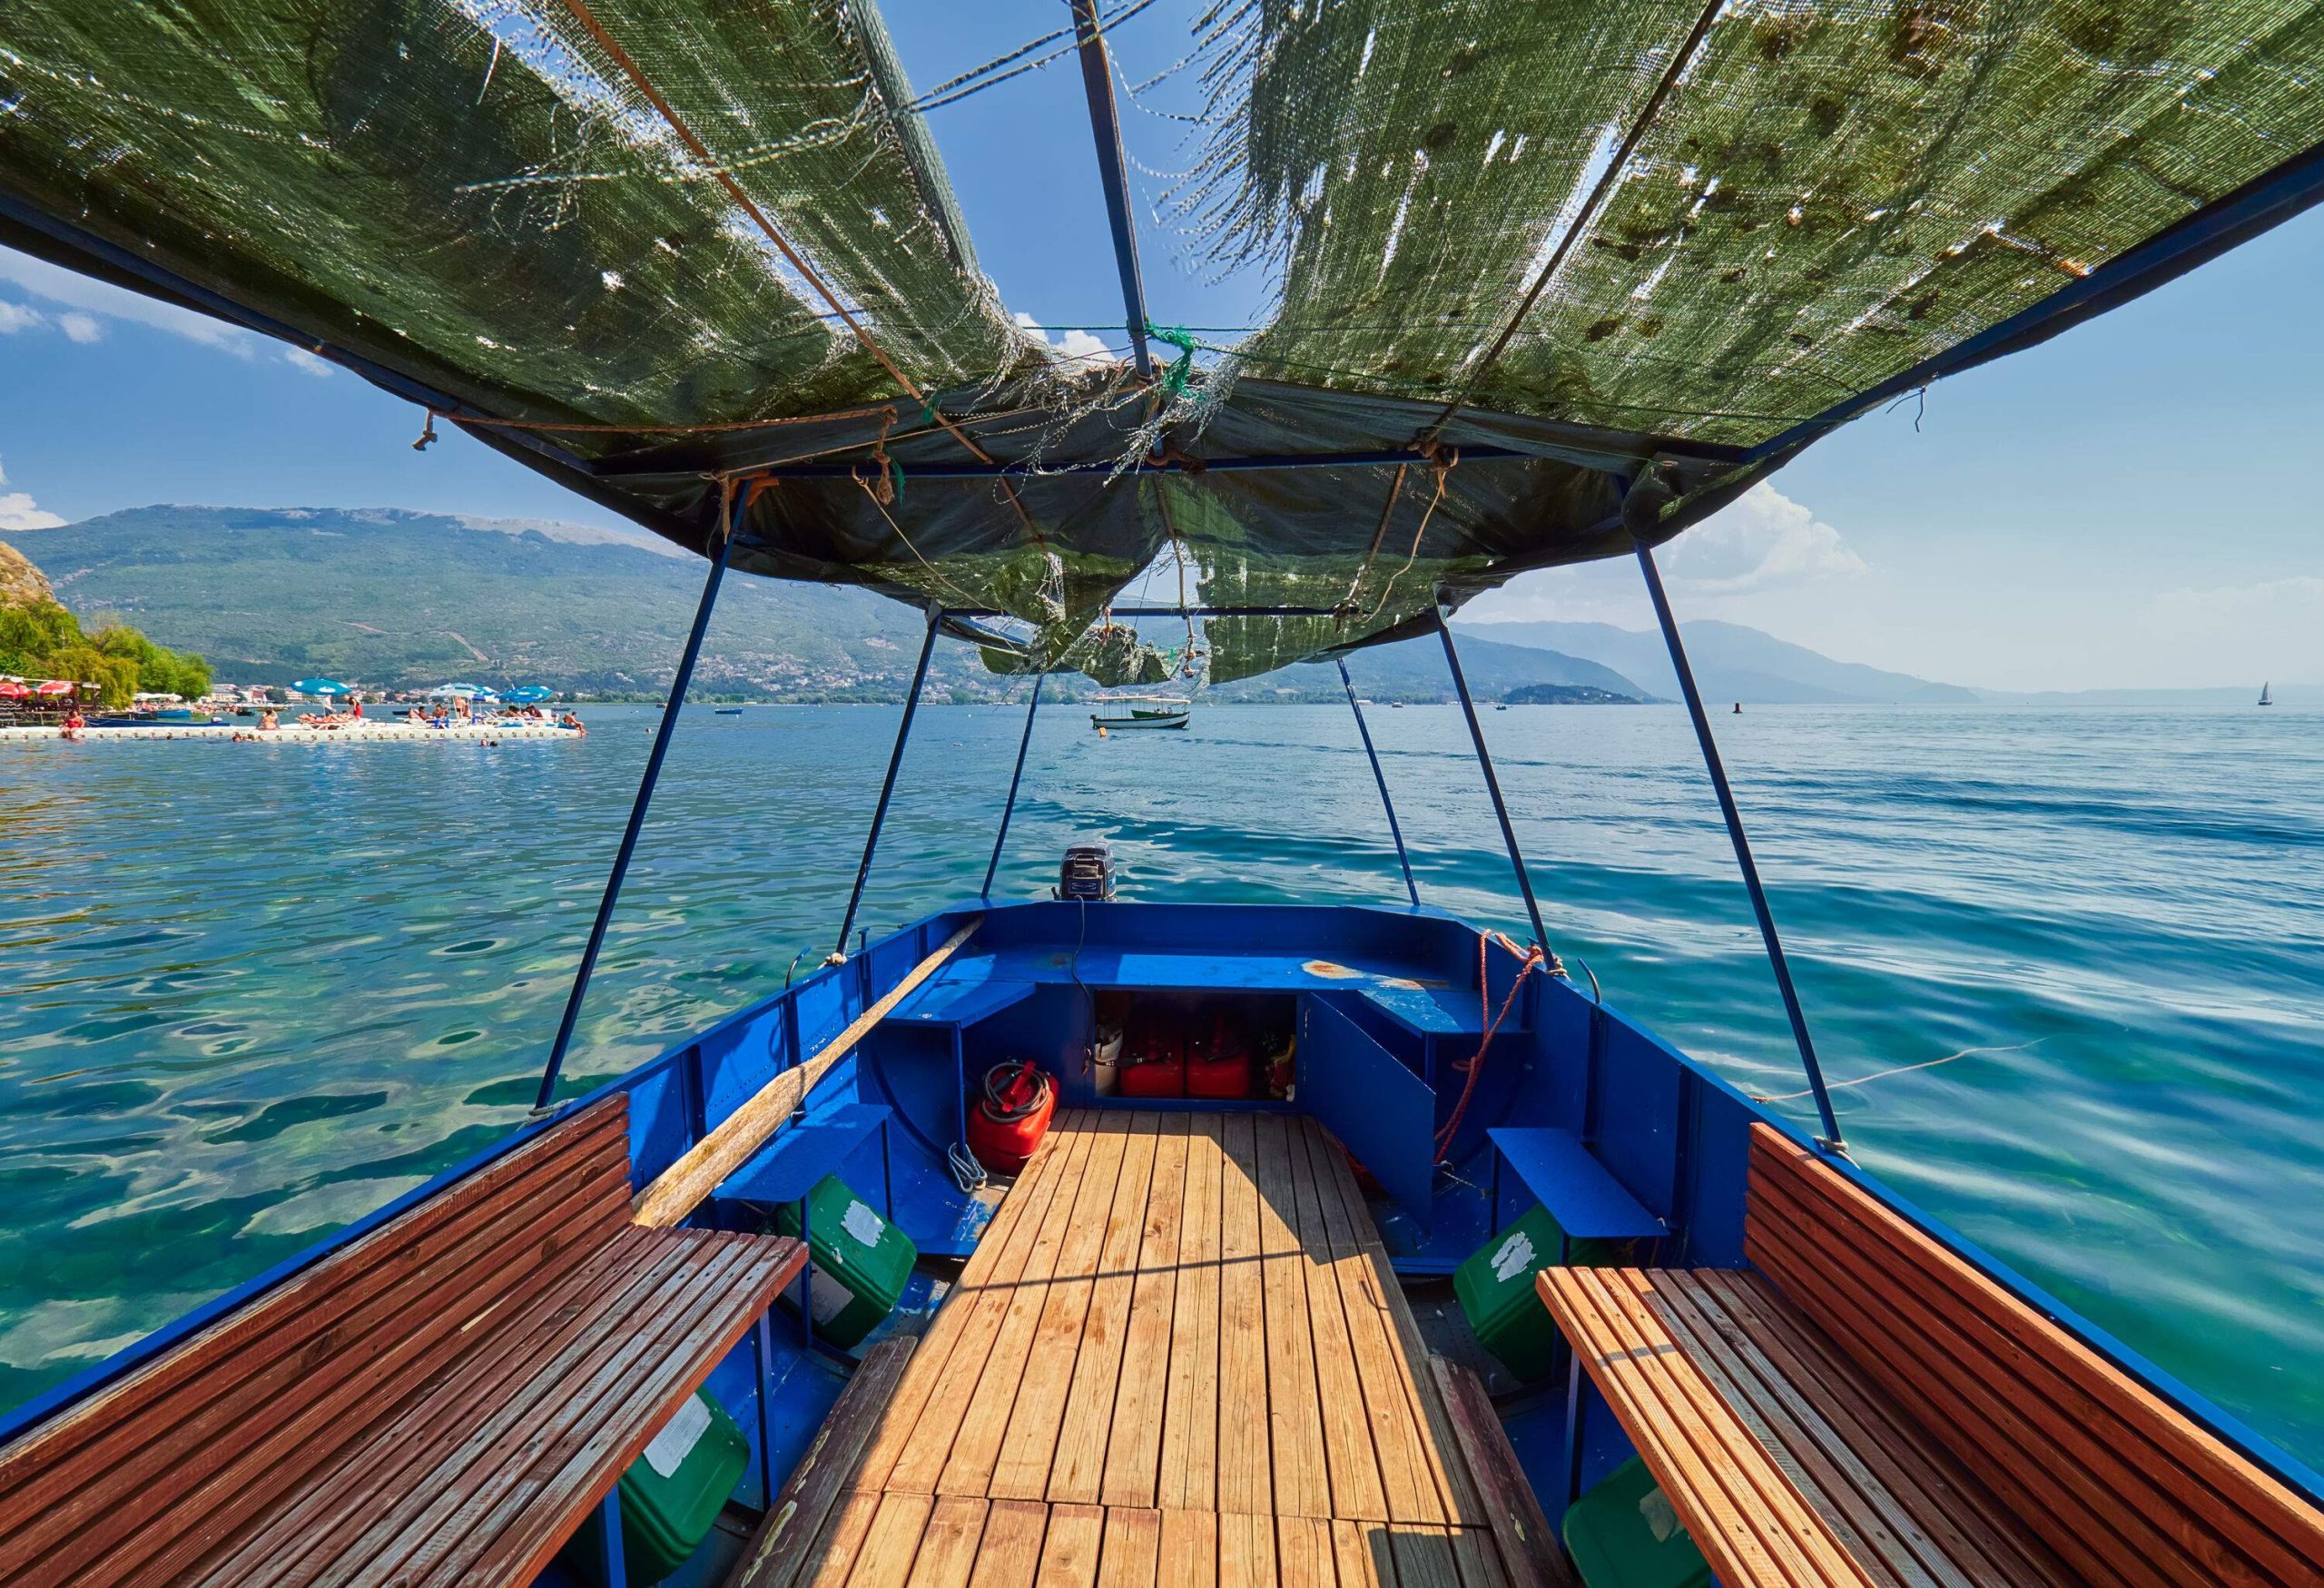 The inside of a boat with wooden floors and seats floating in a lake.